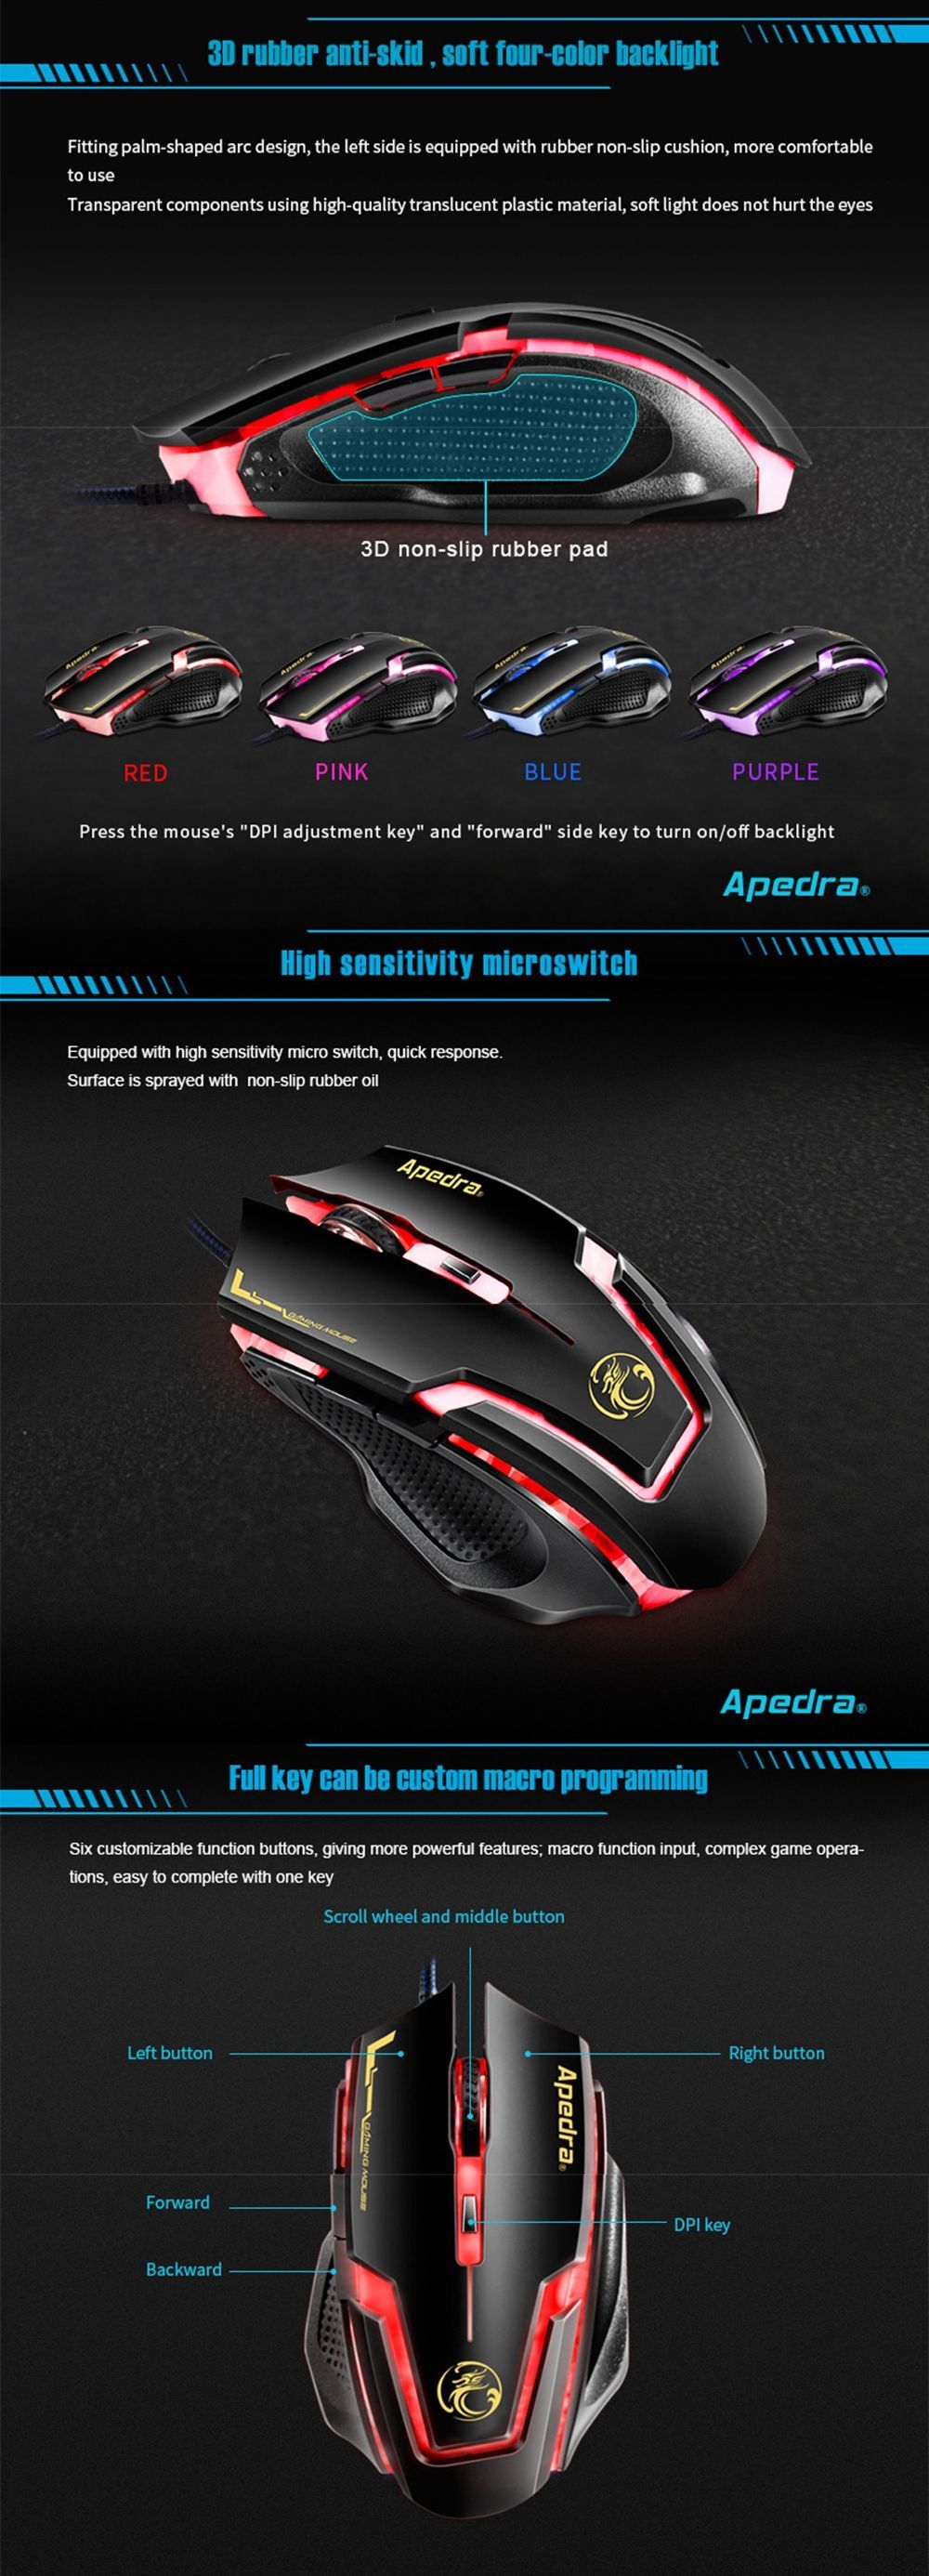 APEDRA-A9-3200DPI-6-Buttons-Optical-USB-Wired-Mouse-4-Color-Controlled-Breathing-Light-Gaming-Mouse-1577610